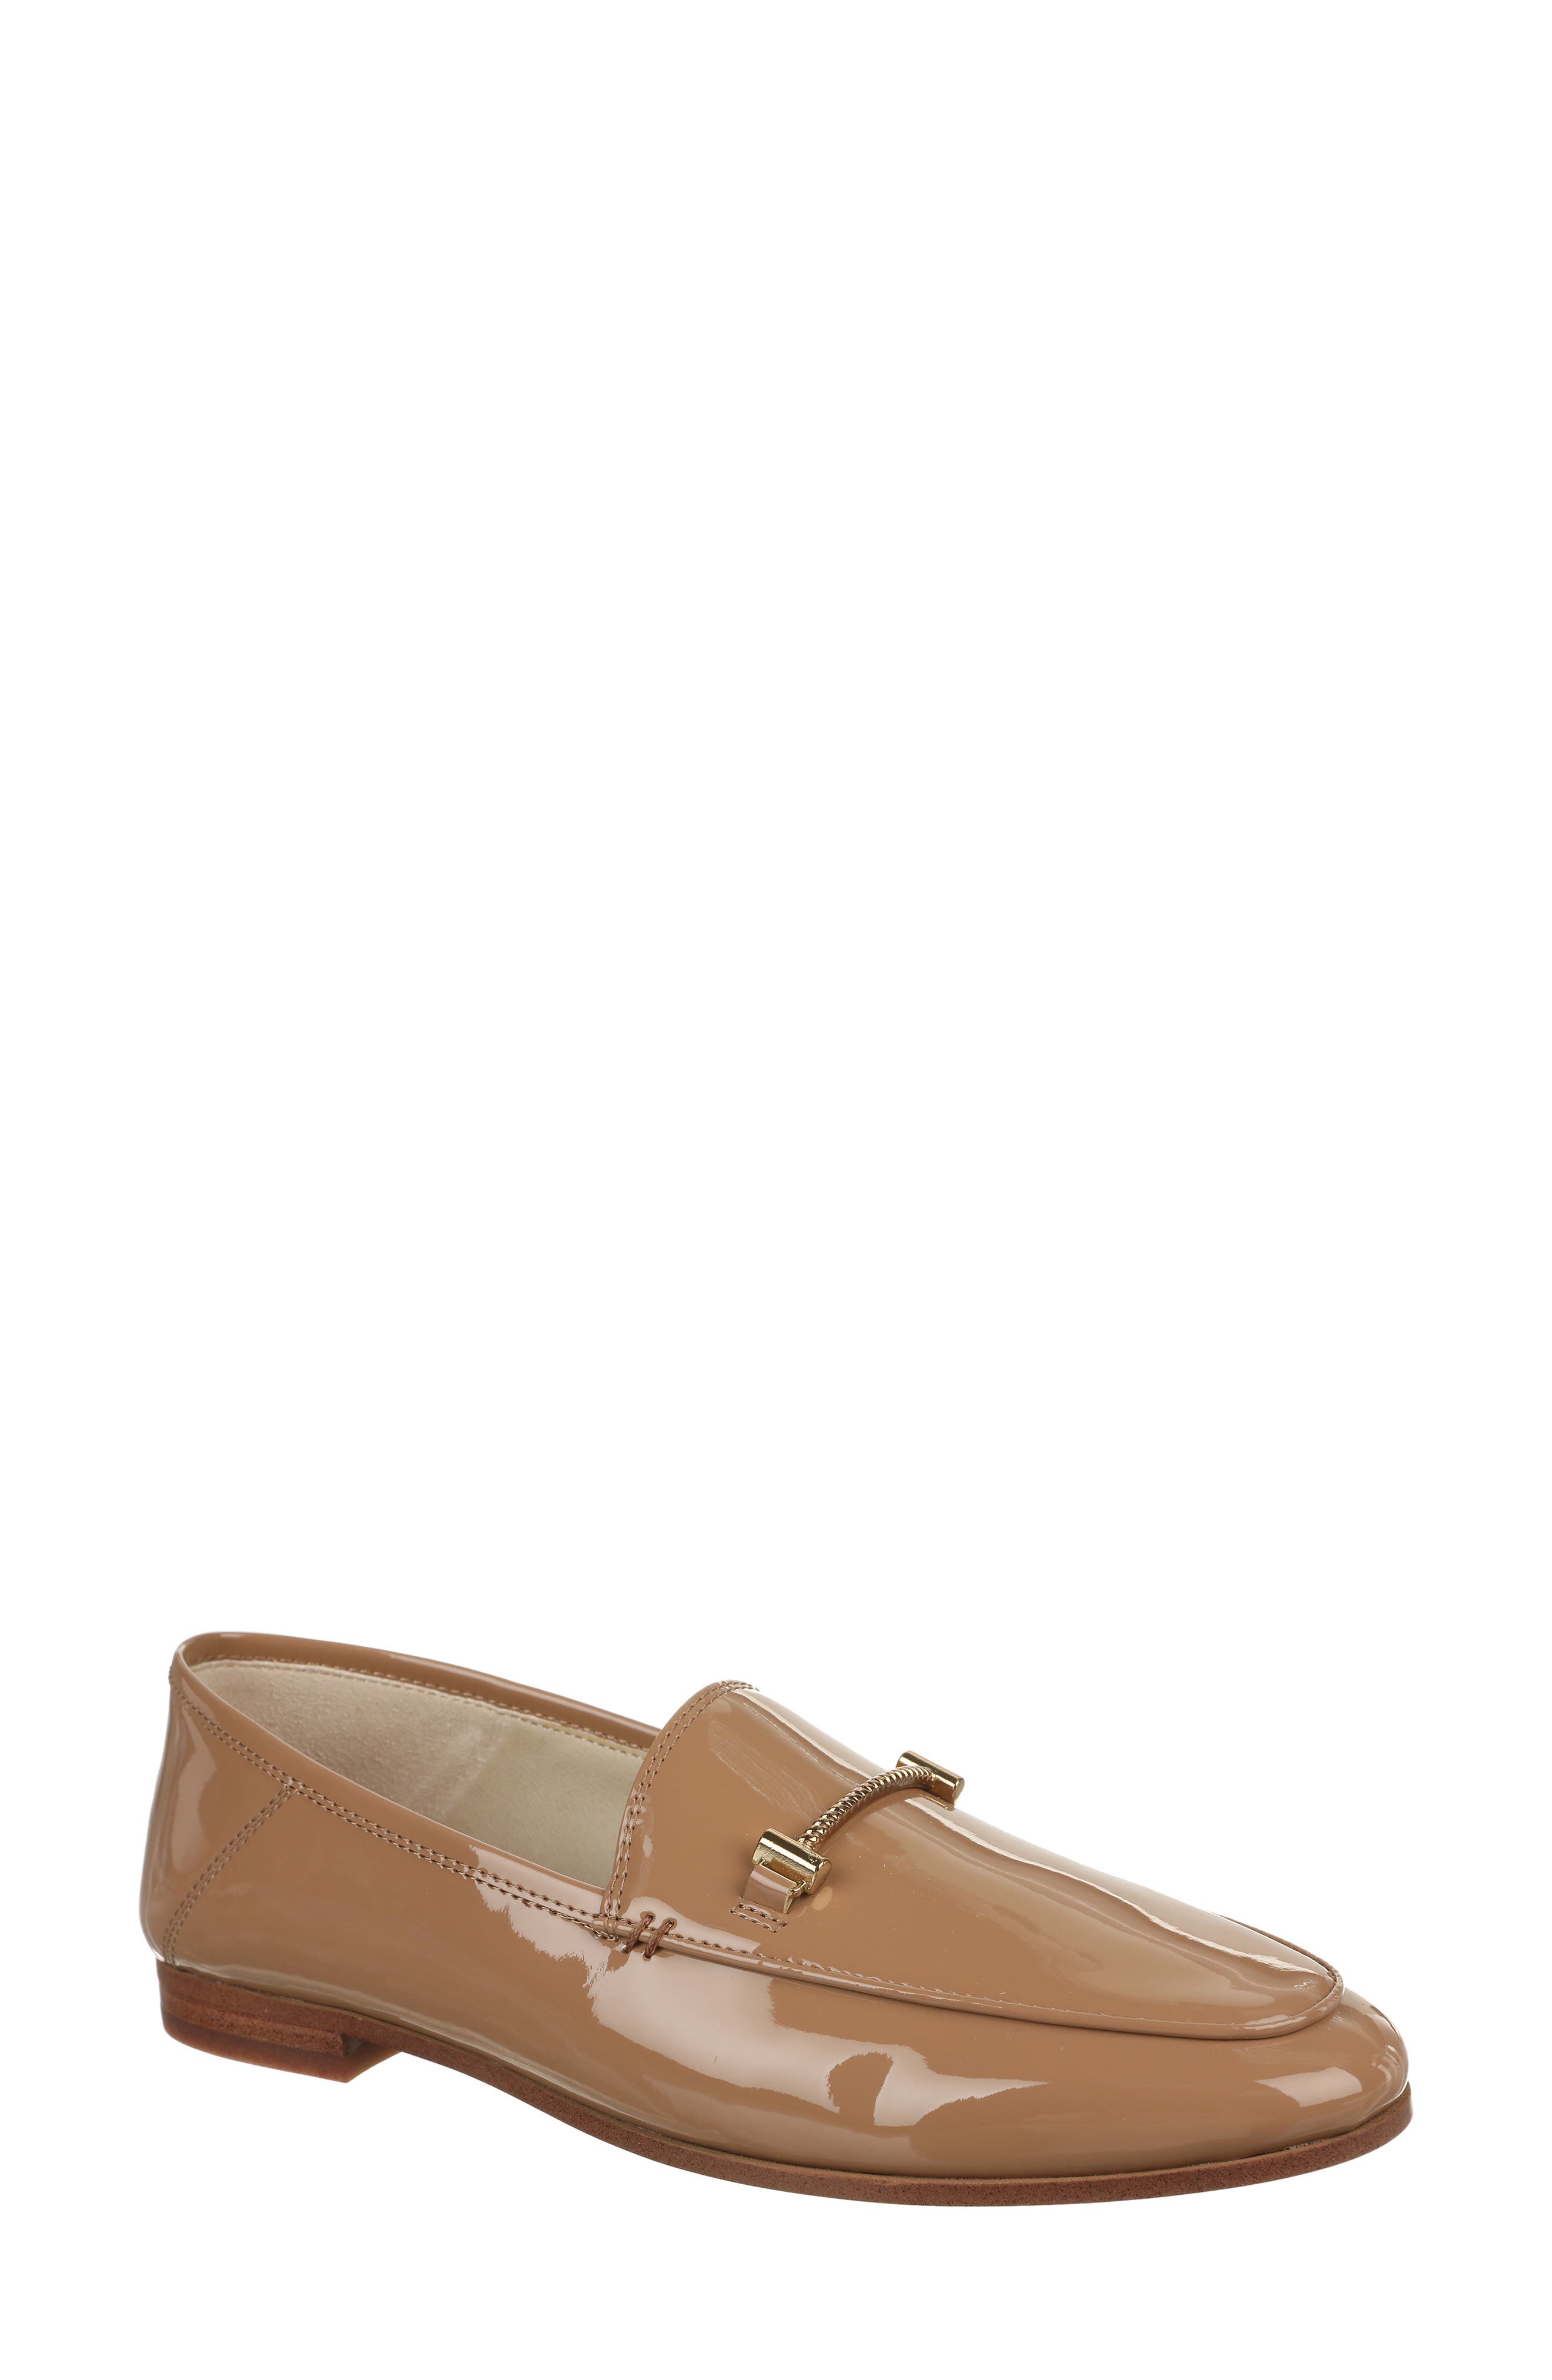 Natural Bottega Veneta Embellished Patent-leather Loafers in Cream Womens Shoes Flats and flat shoes Loafers and moccasins 